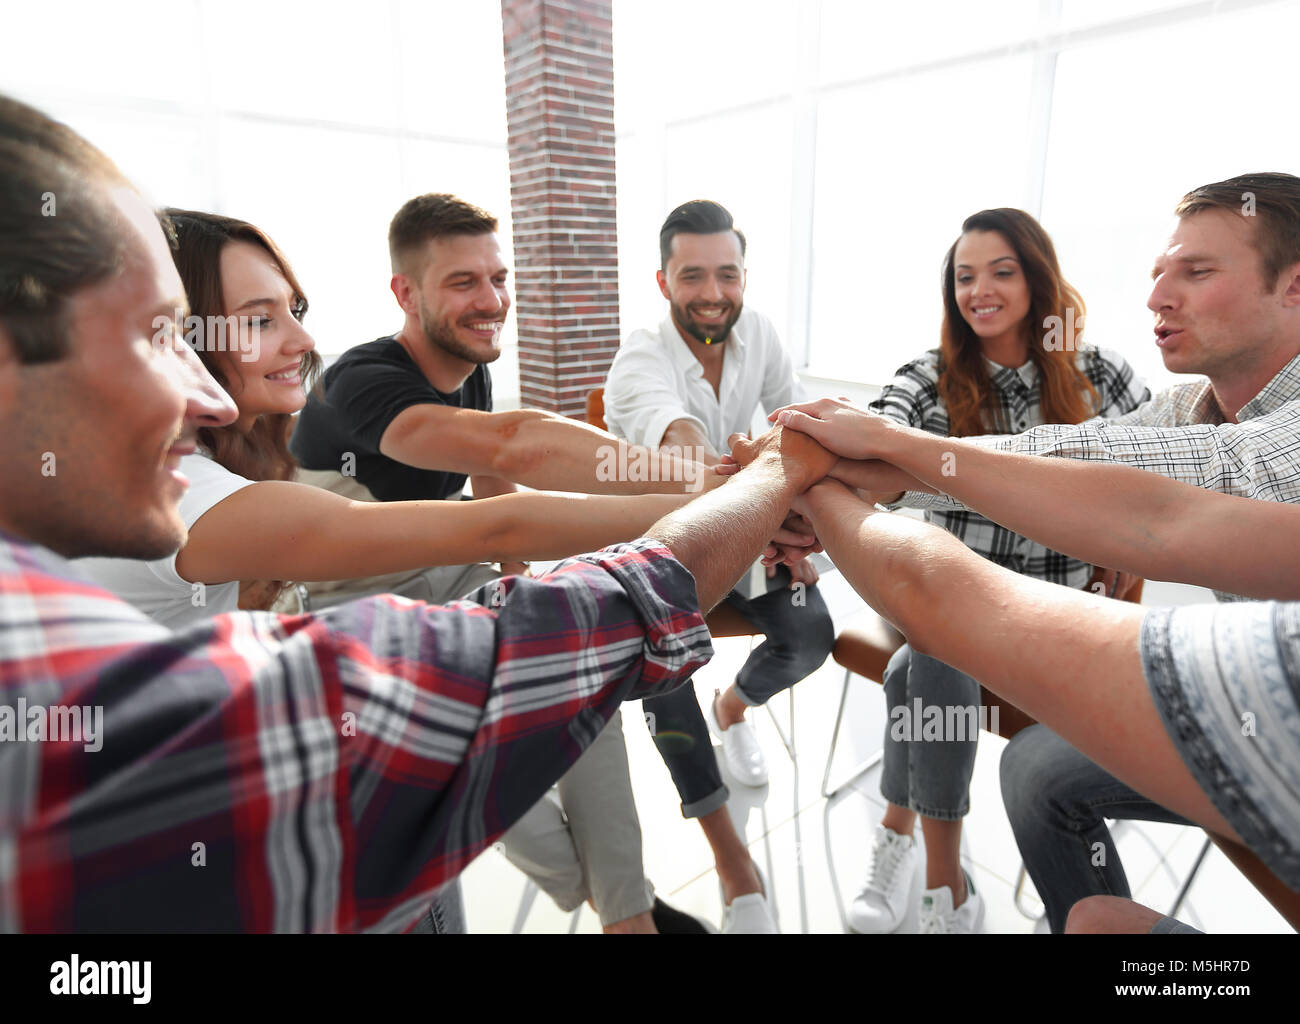 unified business team.the concept of teamwork Stock Photo